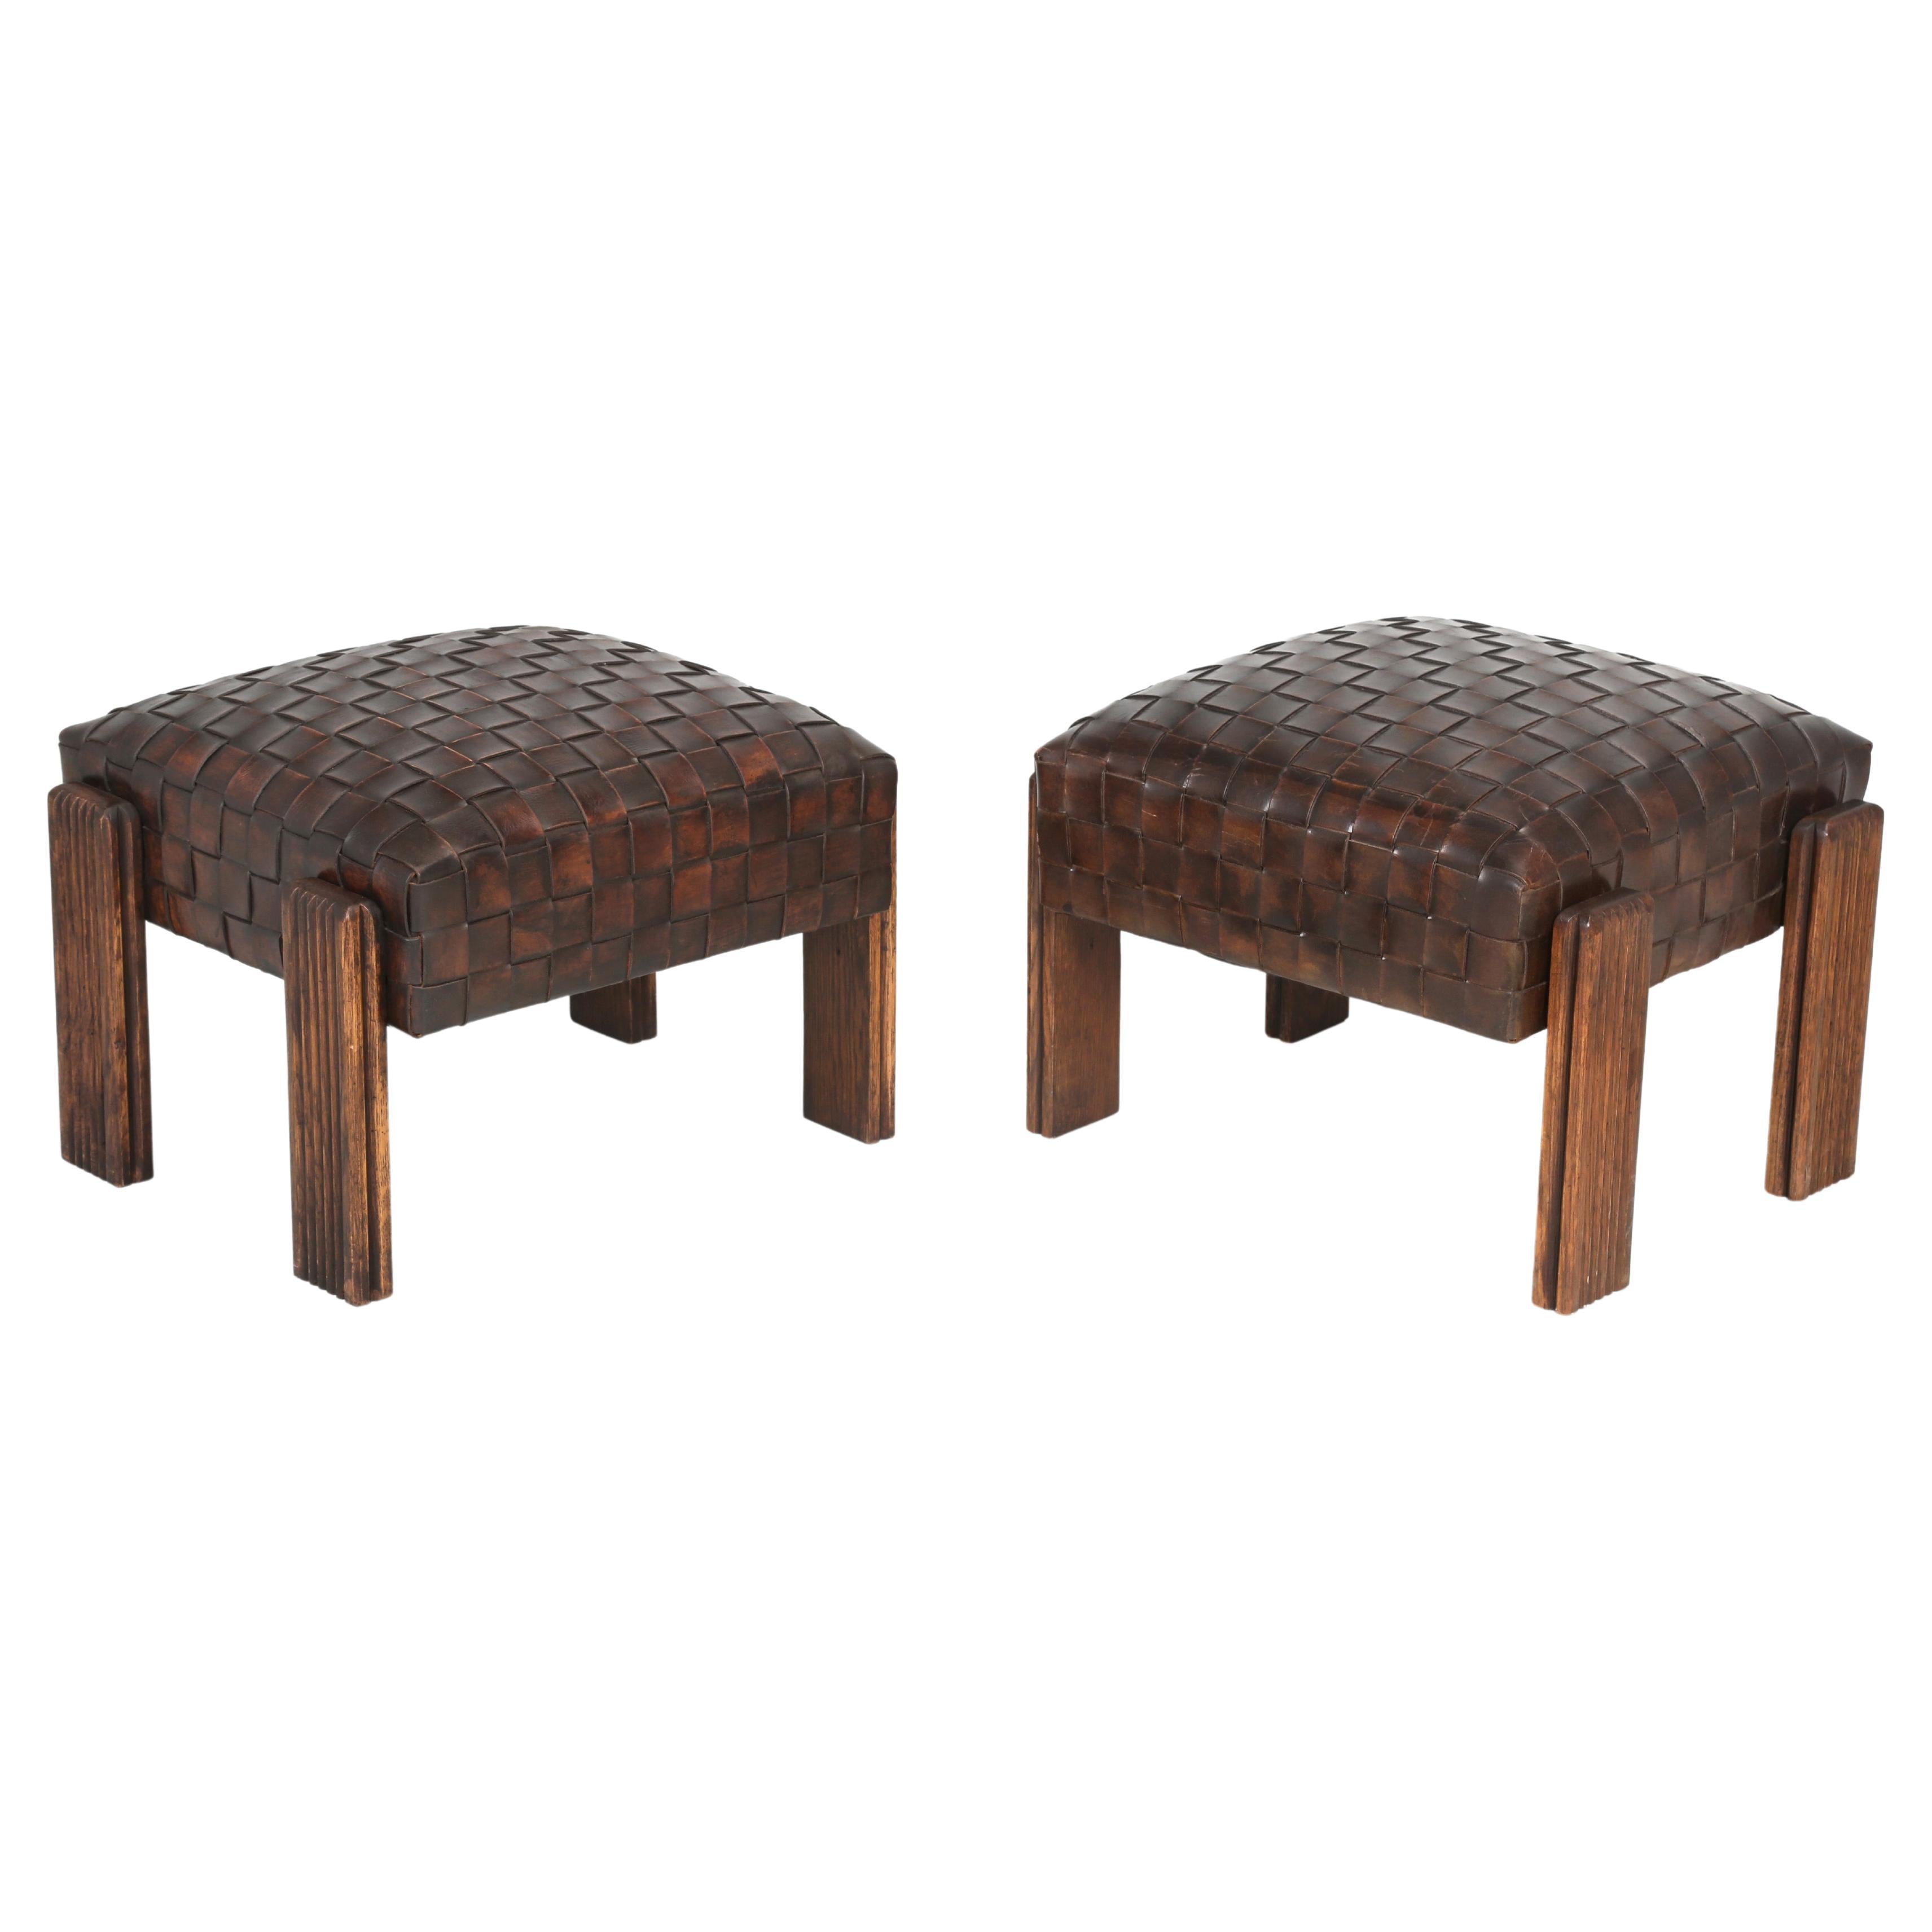 French Inspired Woven Leather Ottomans Made in House Available in Any Dimension For Sale